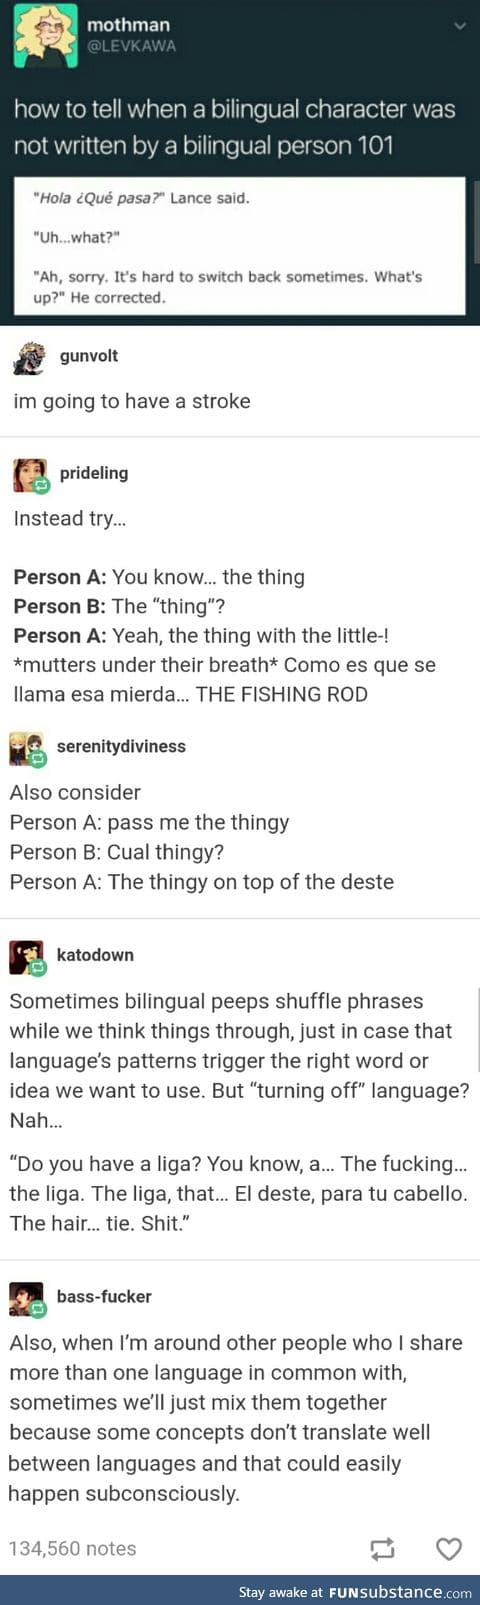 I needed this. Because I'm not bilingual and didn't know.